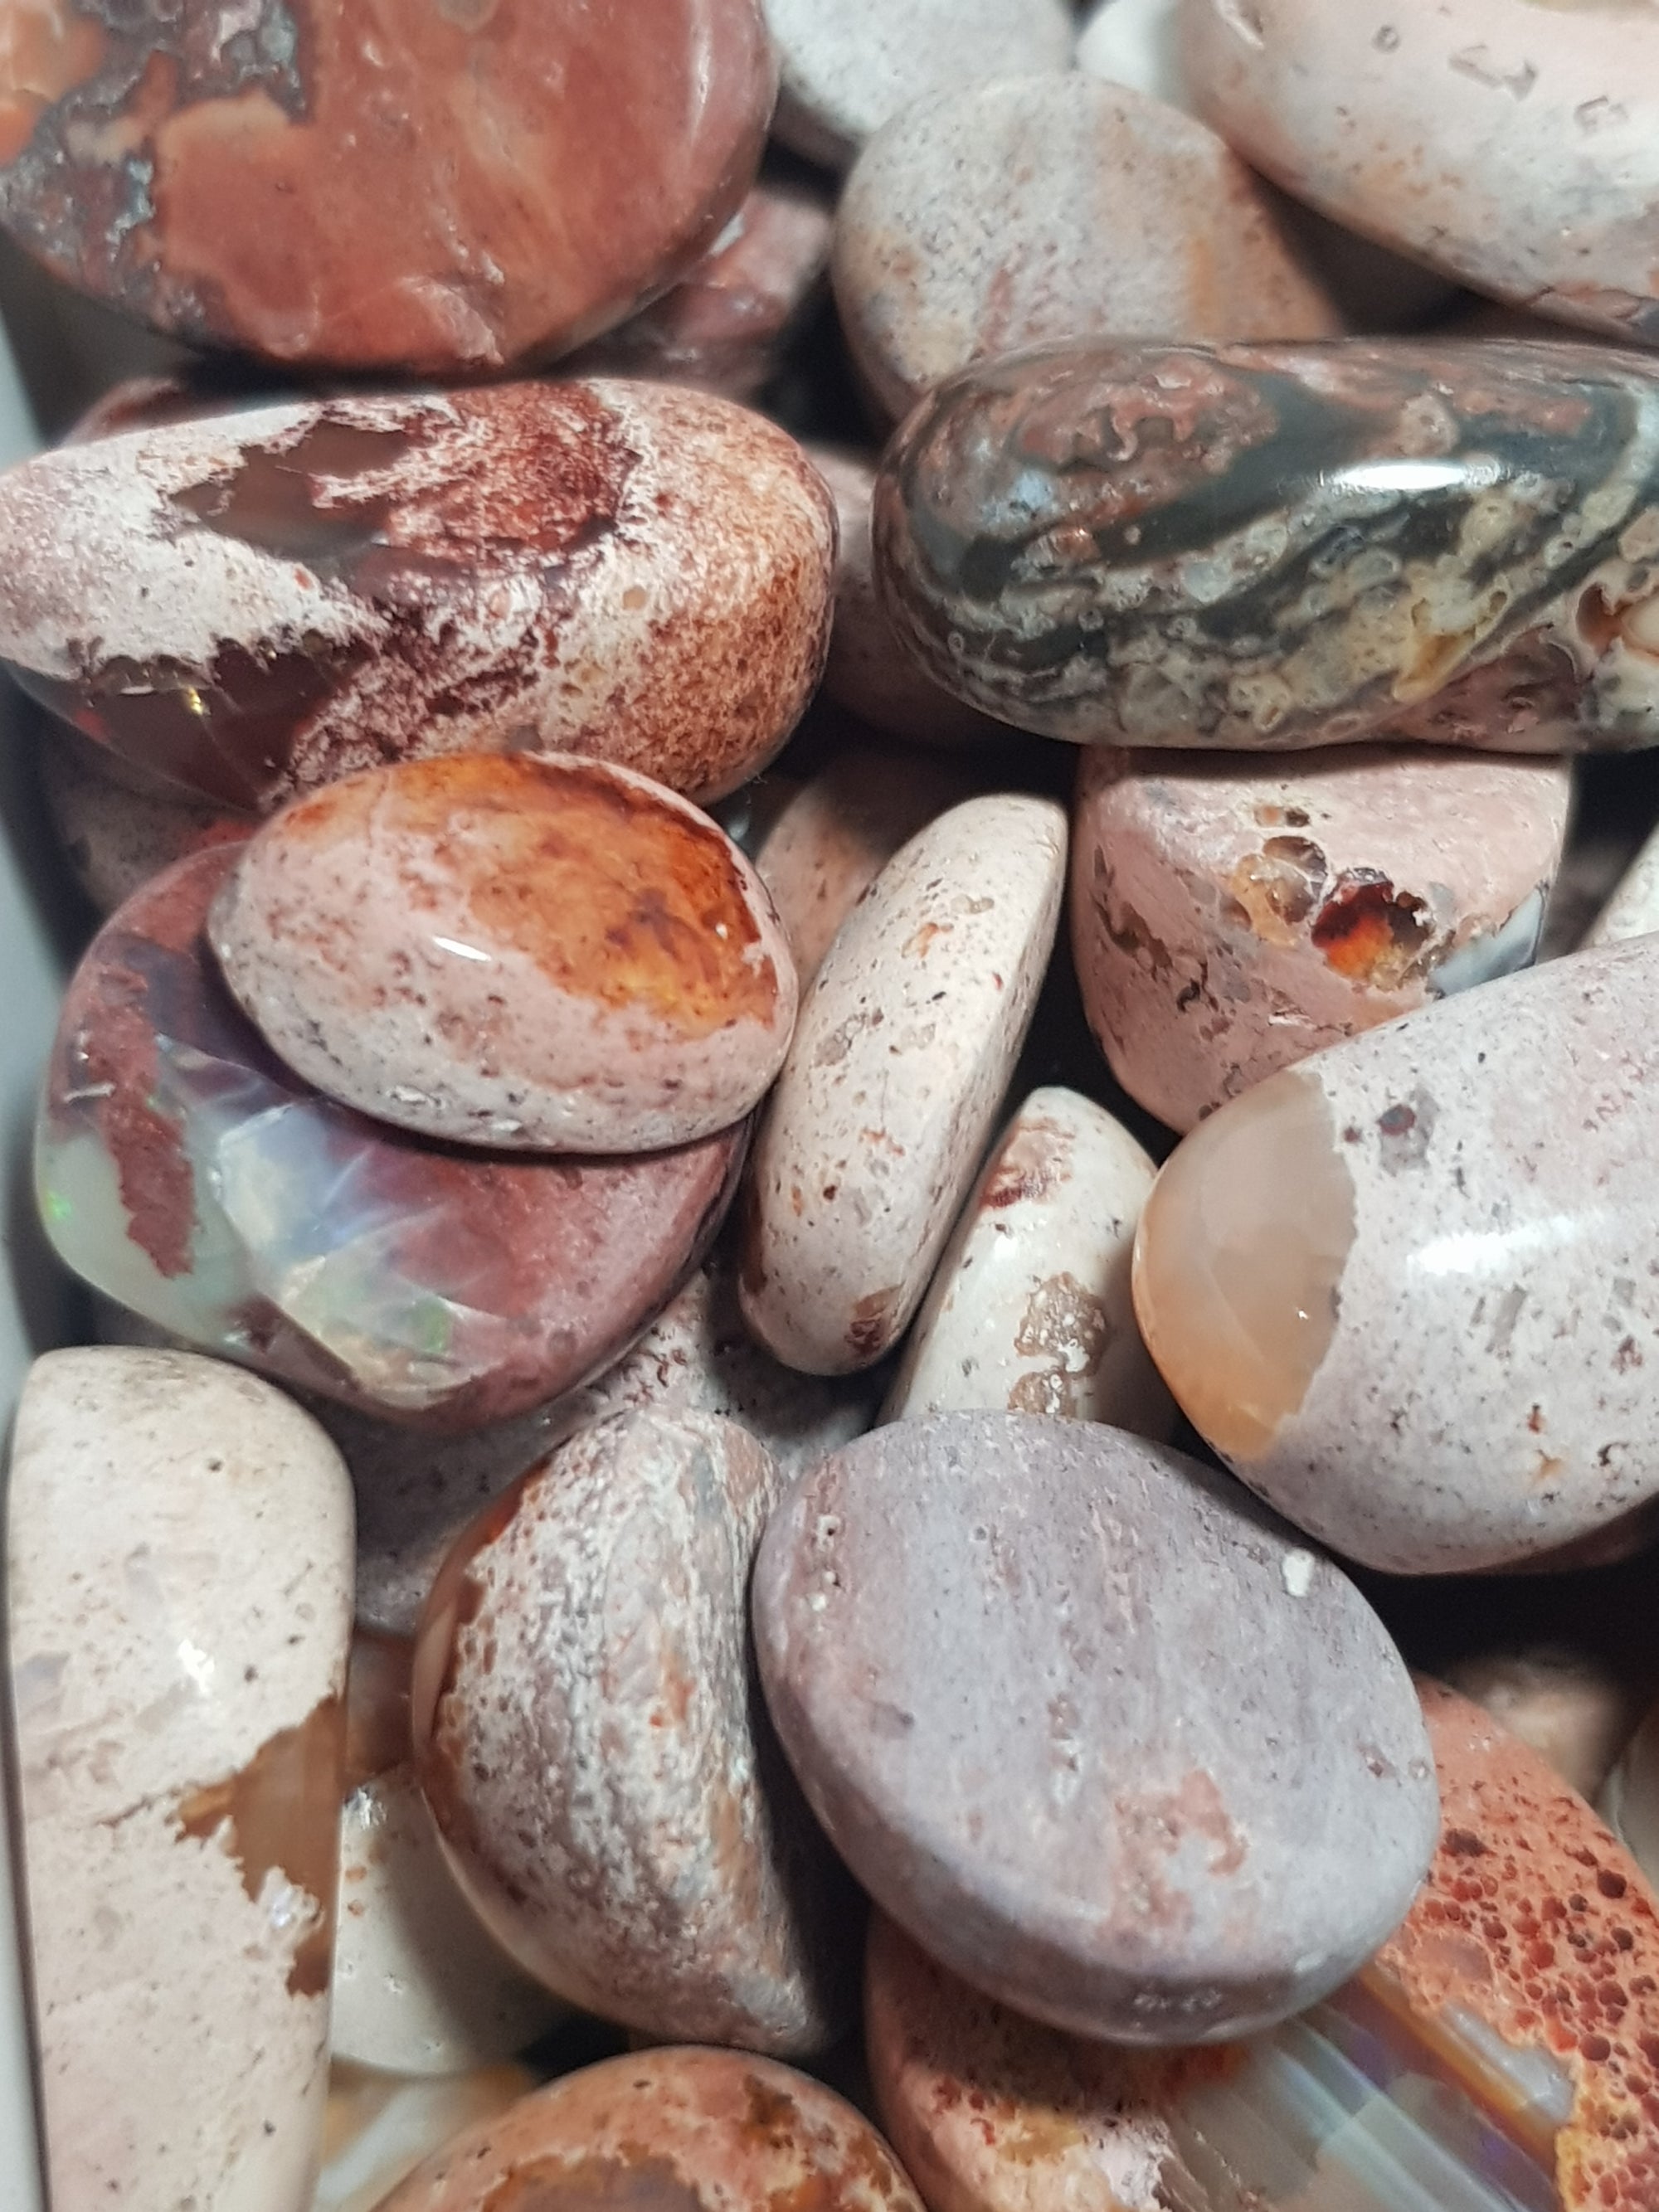 box of mexican fire opals in rhyolite. The opals are mostly red, but there are some blue pieces